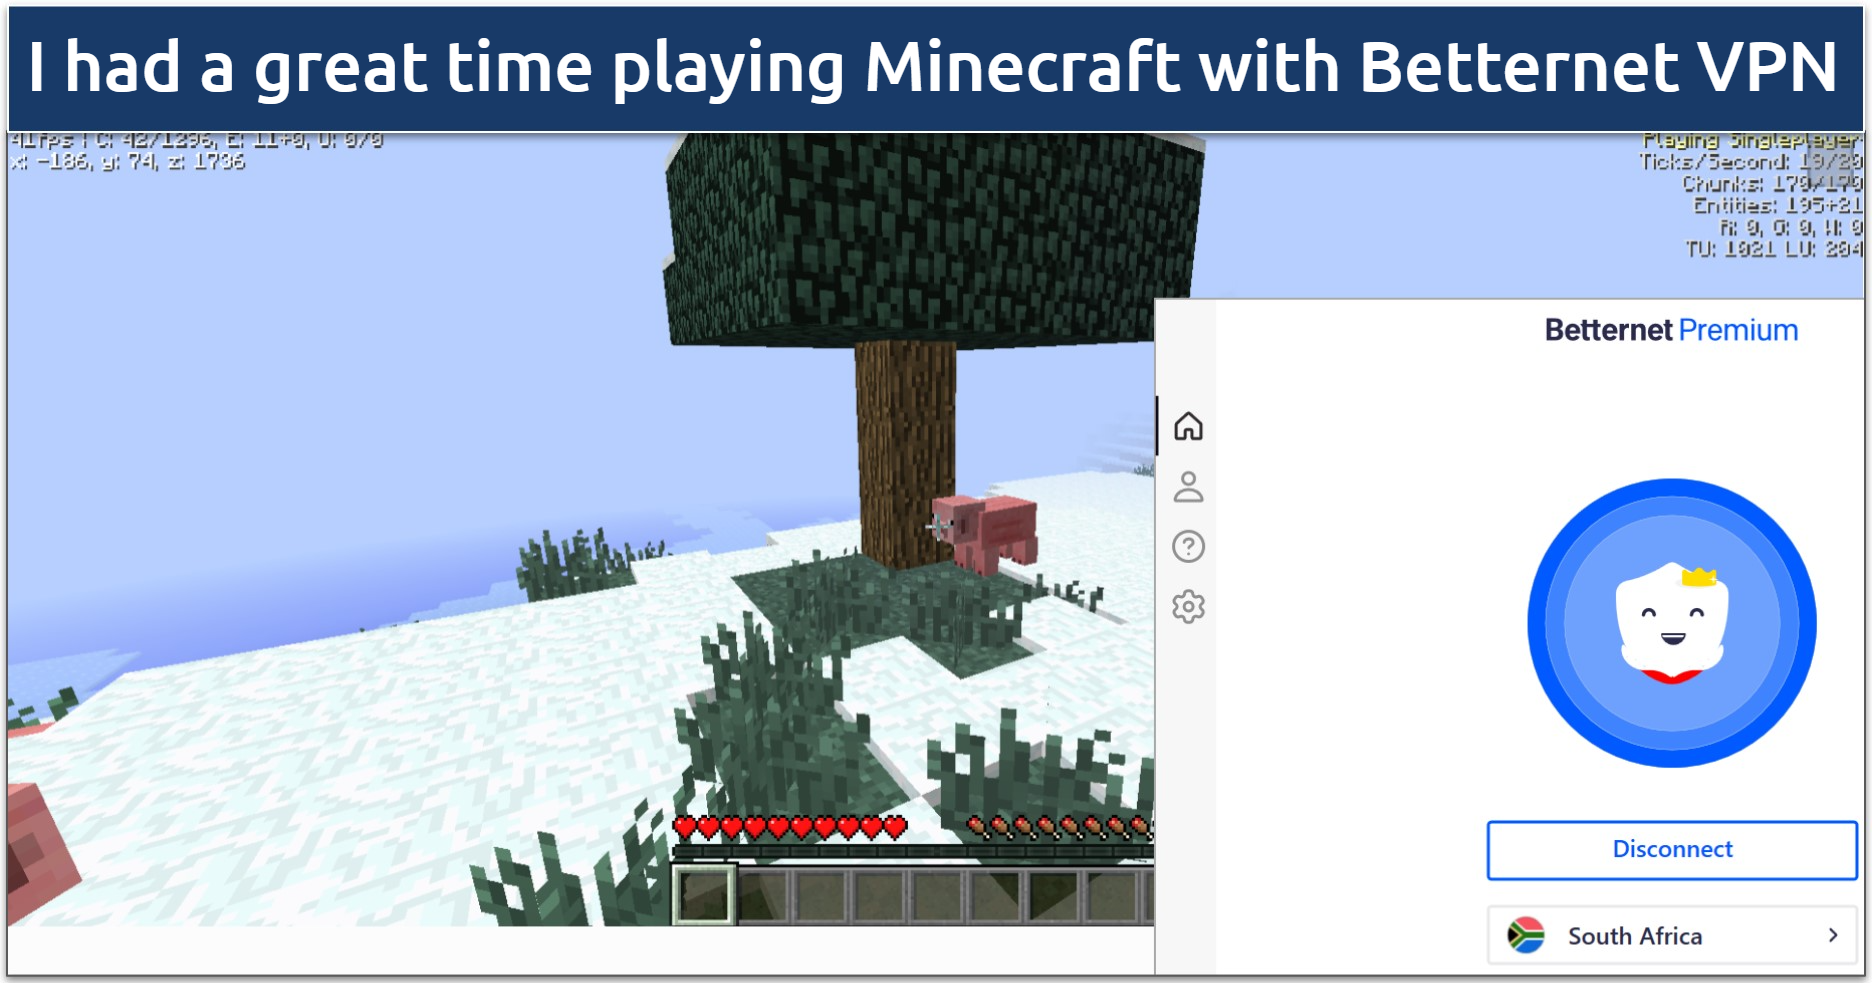 Screenshot of Minecraft being played while connected to Betternet VPN South Africa server